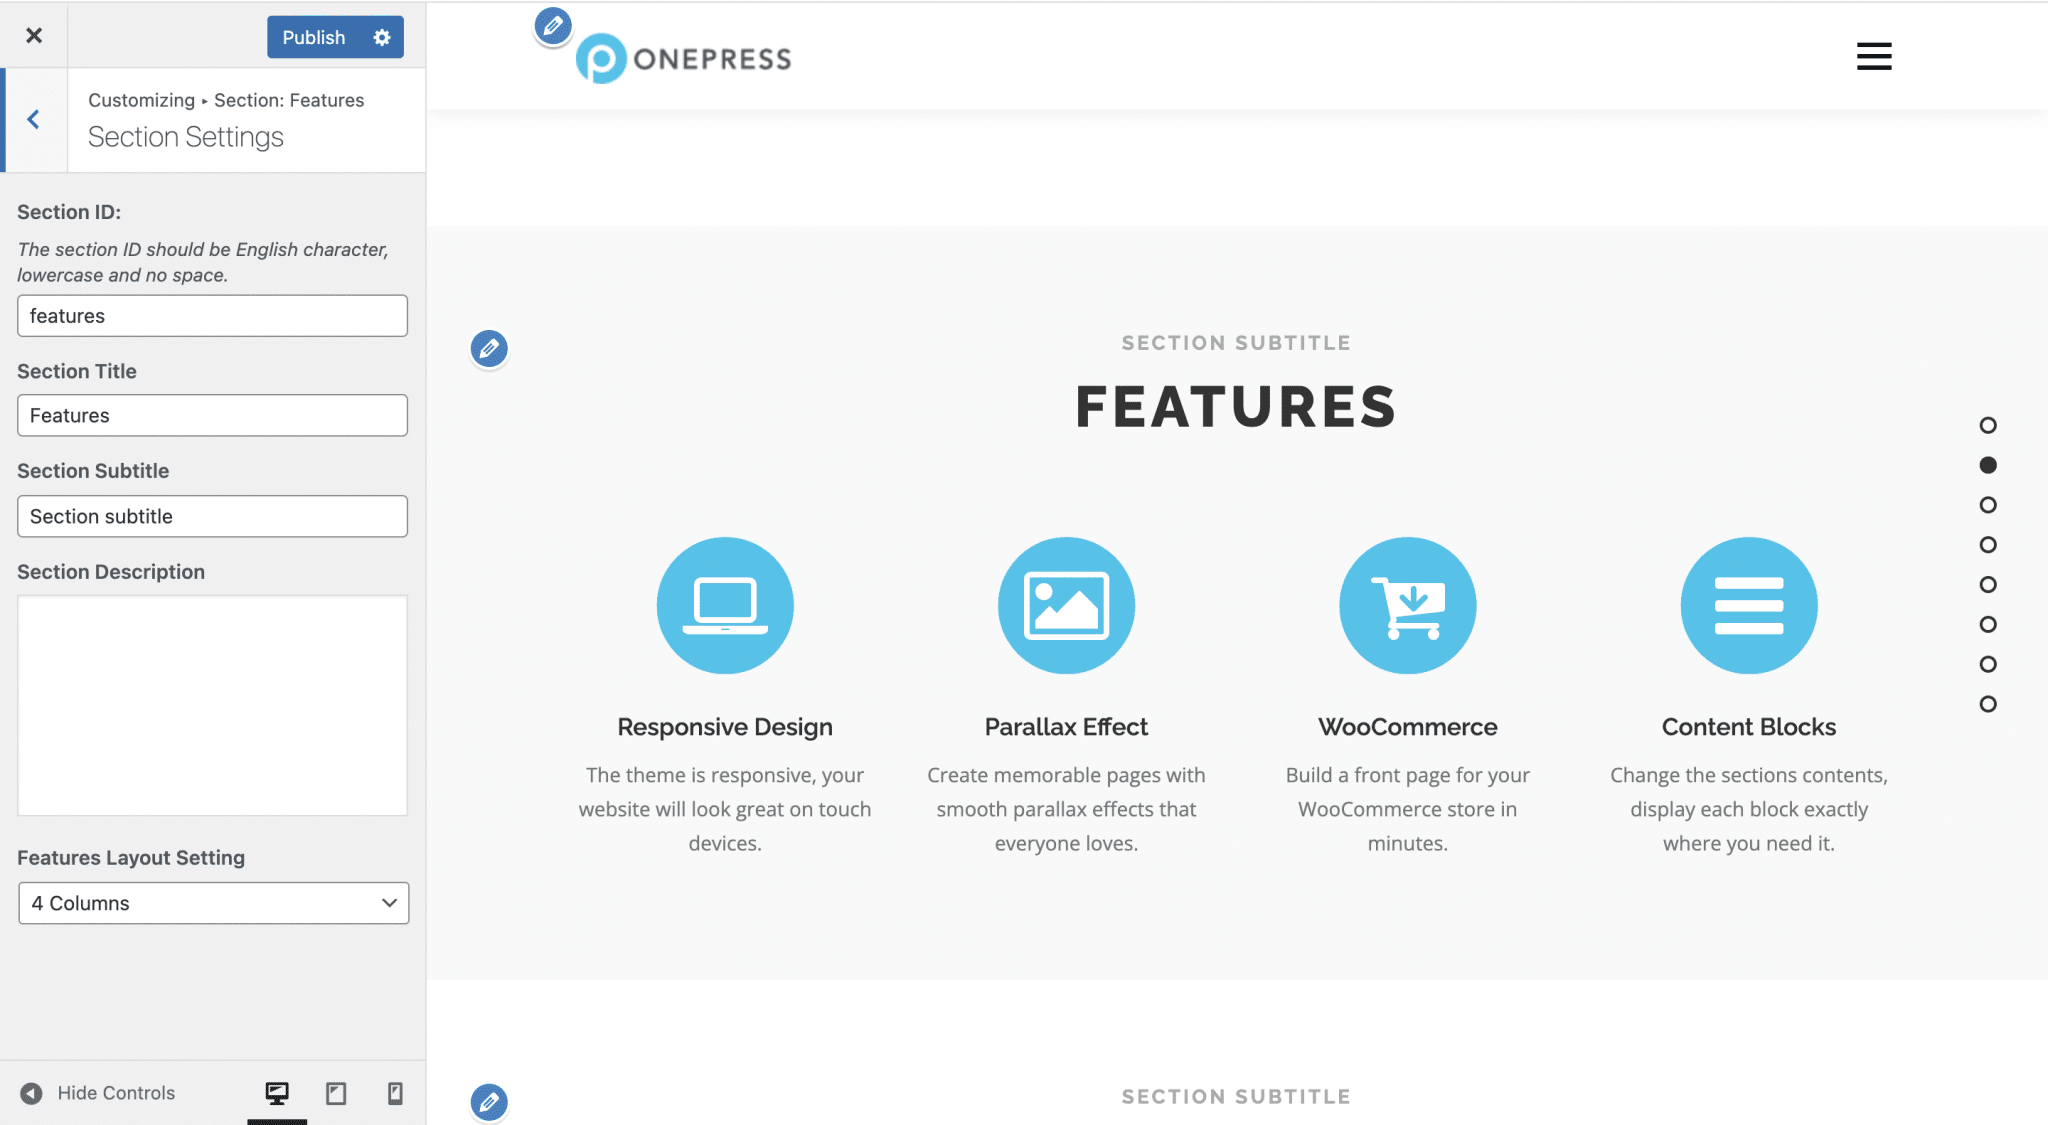 "Features" section settings of a WordPress OnePress site.